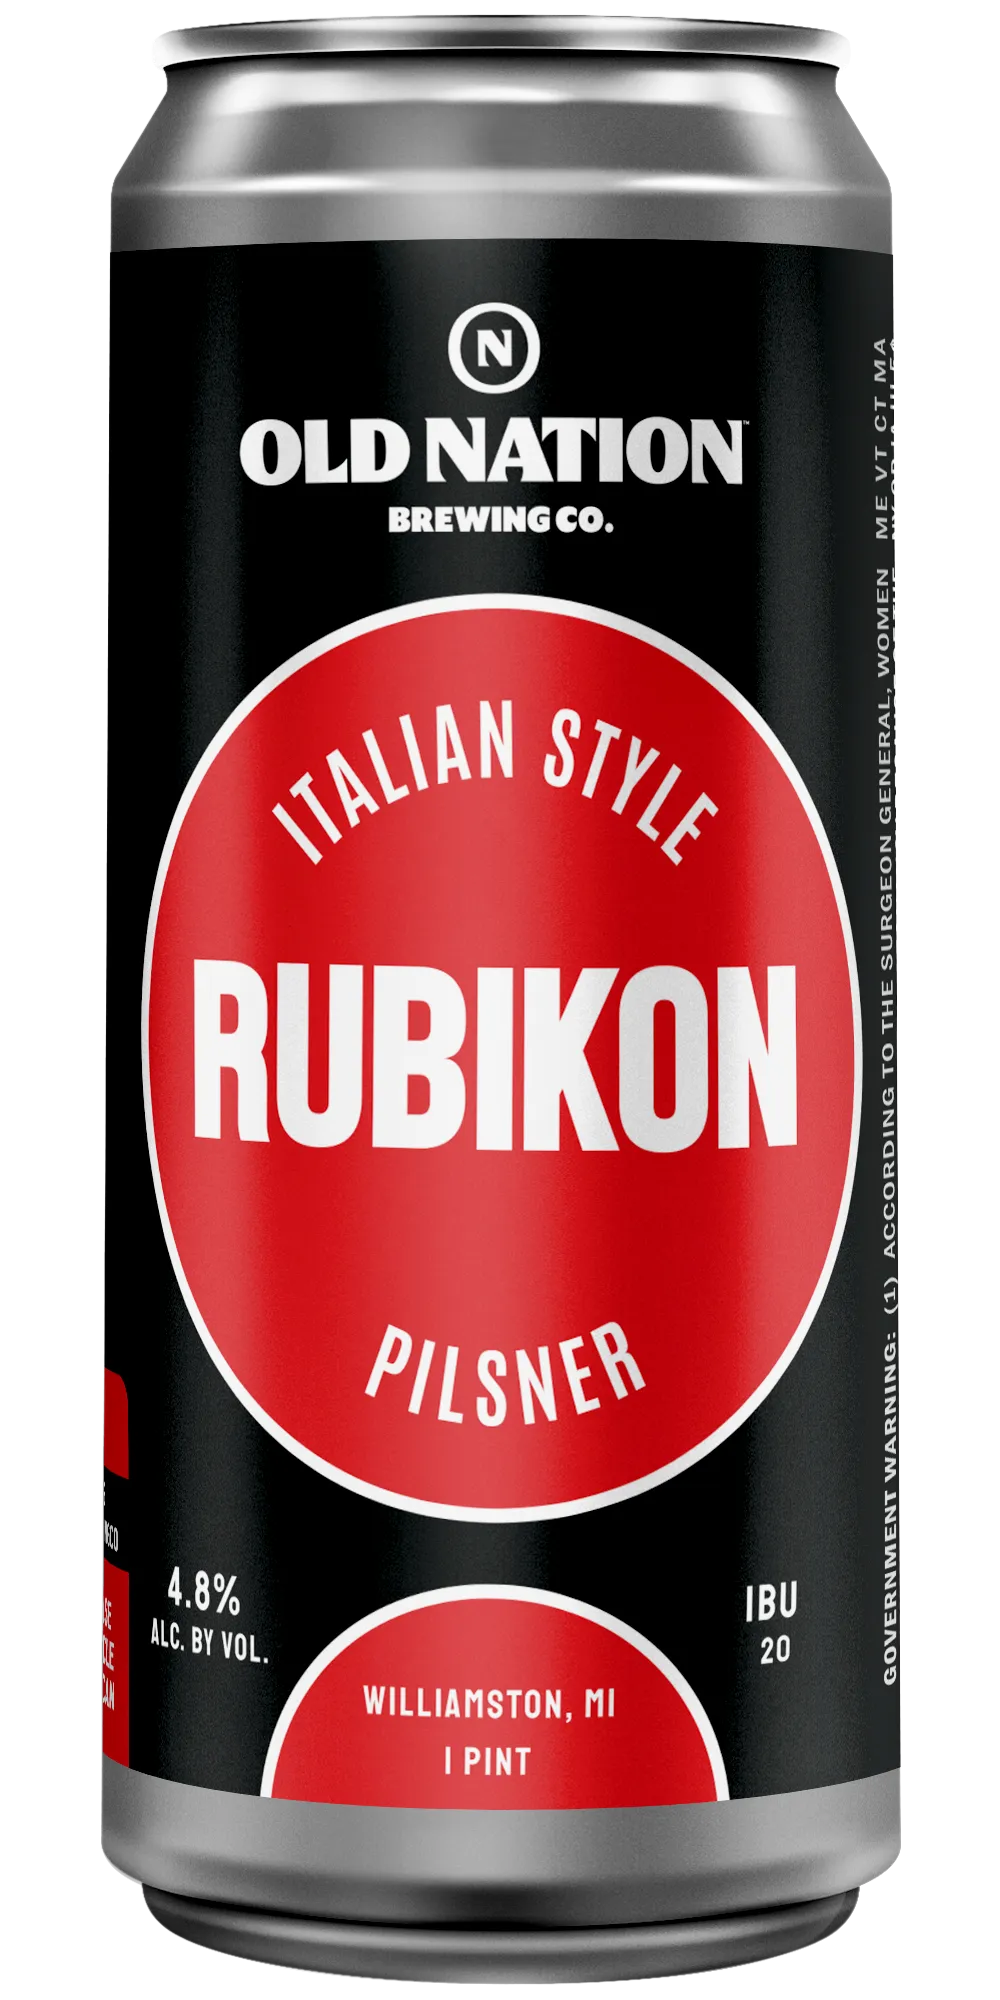 Old Nation Rubikon beer in an aluminum can